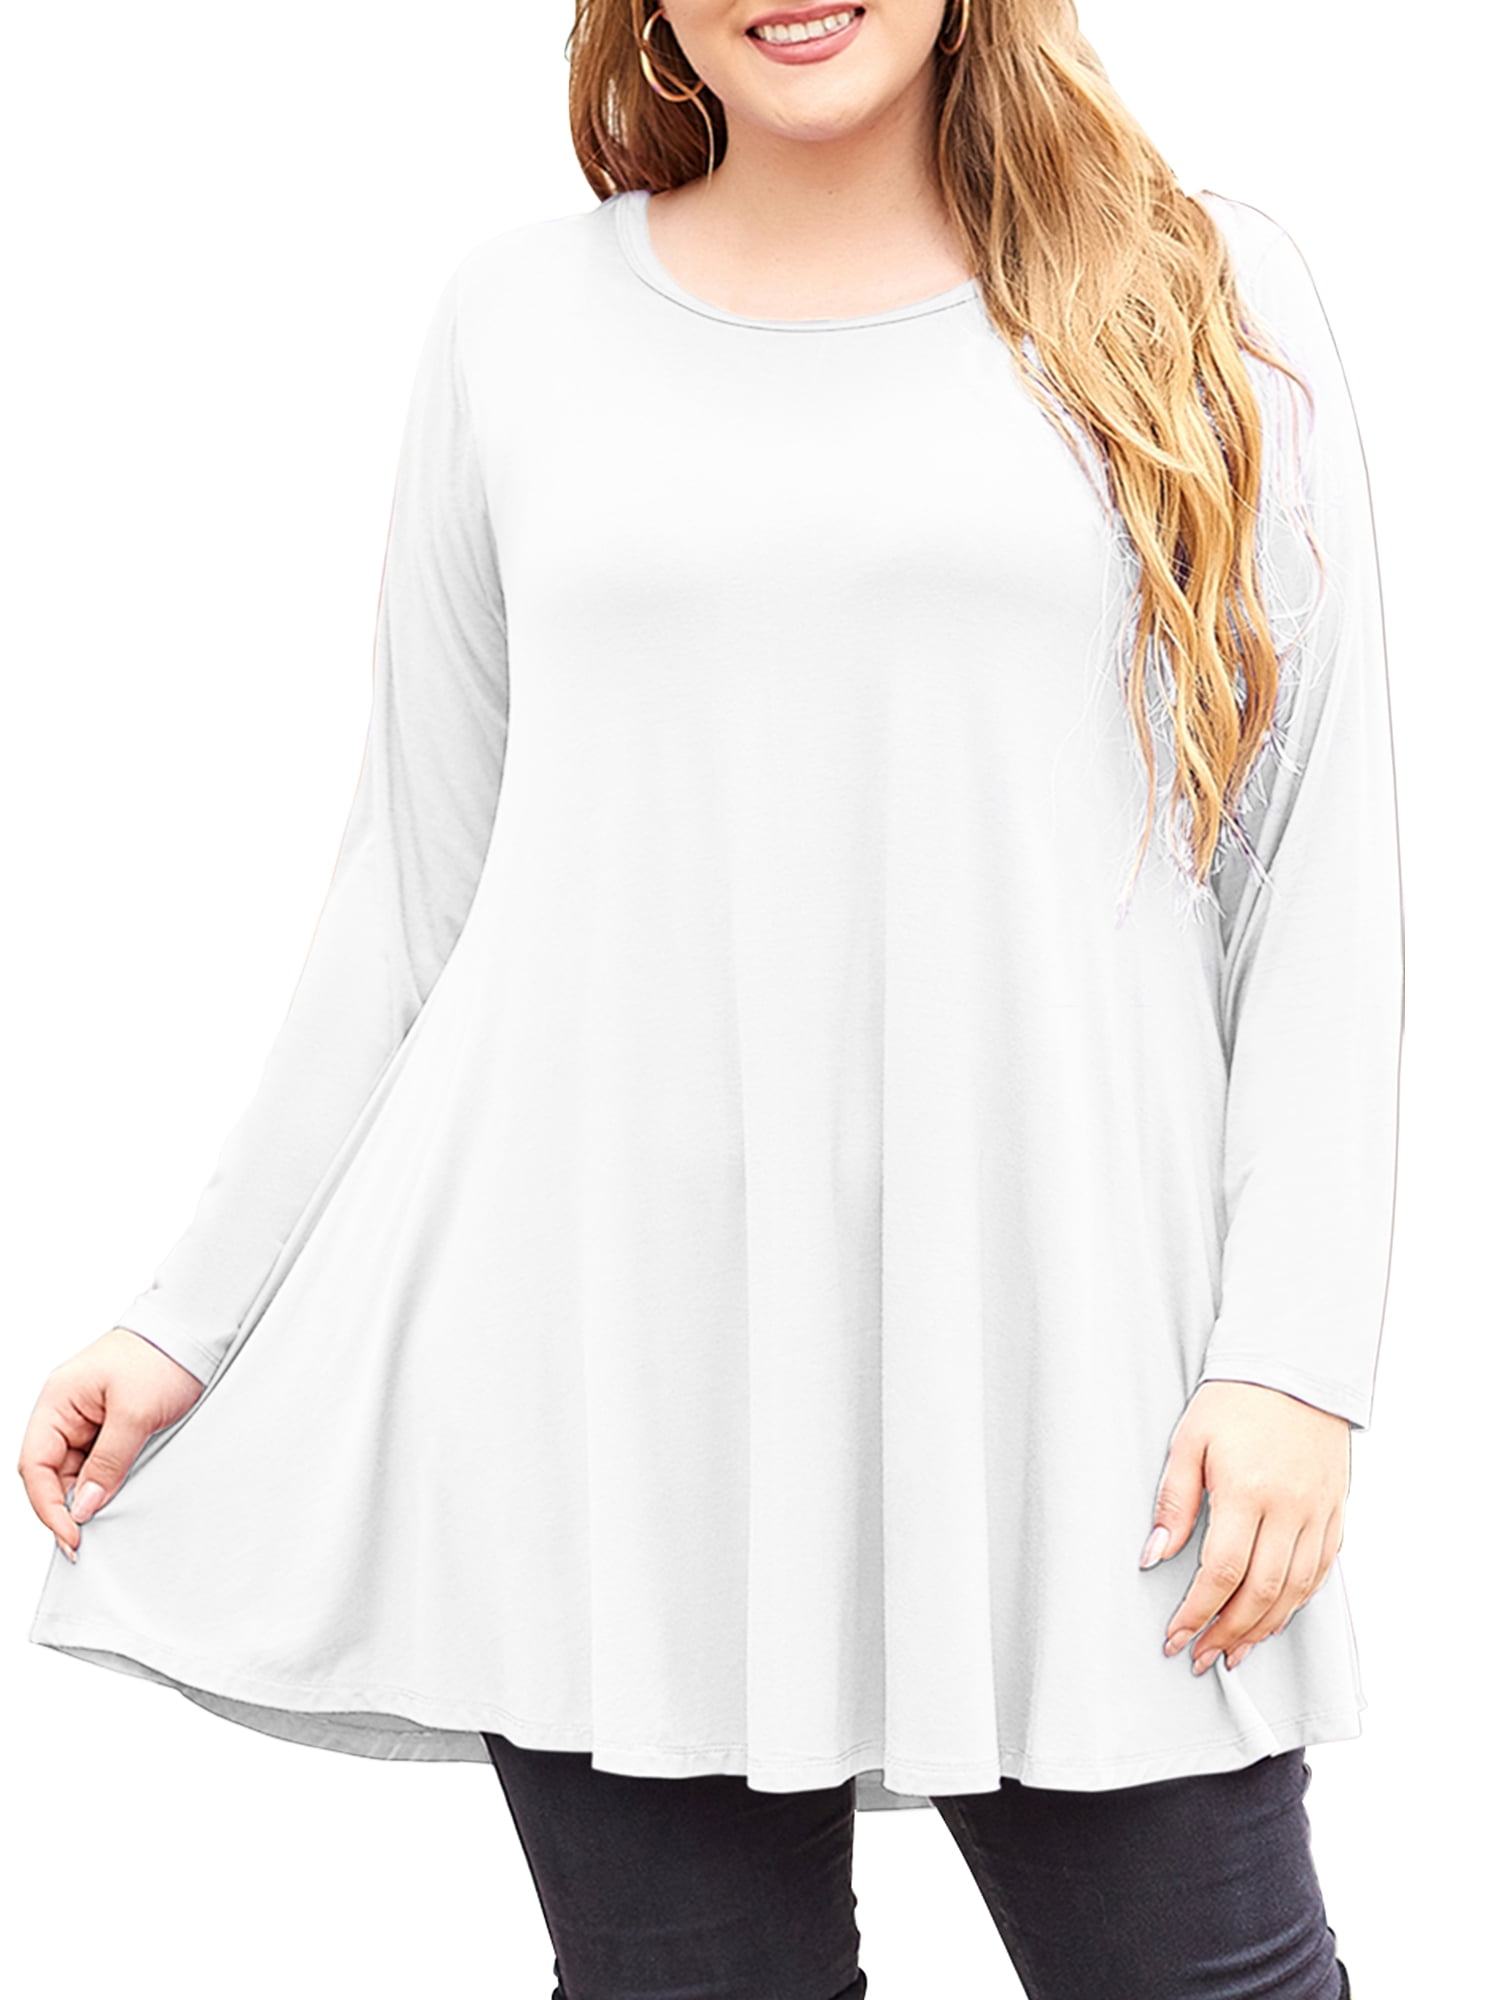 LARACE Plus Size Tops for Women 3/4 Sleeve Shirts Tunic Tops Loose Fit  Basic Lady Clothes at  Women’s Clothing store